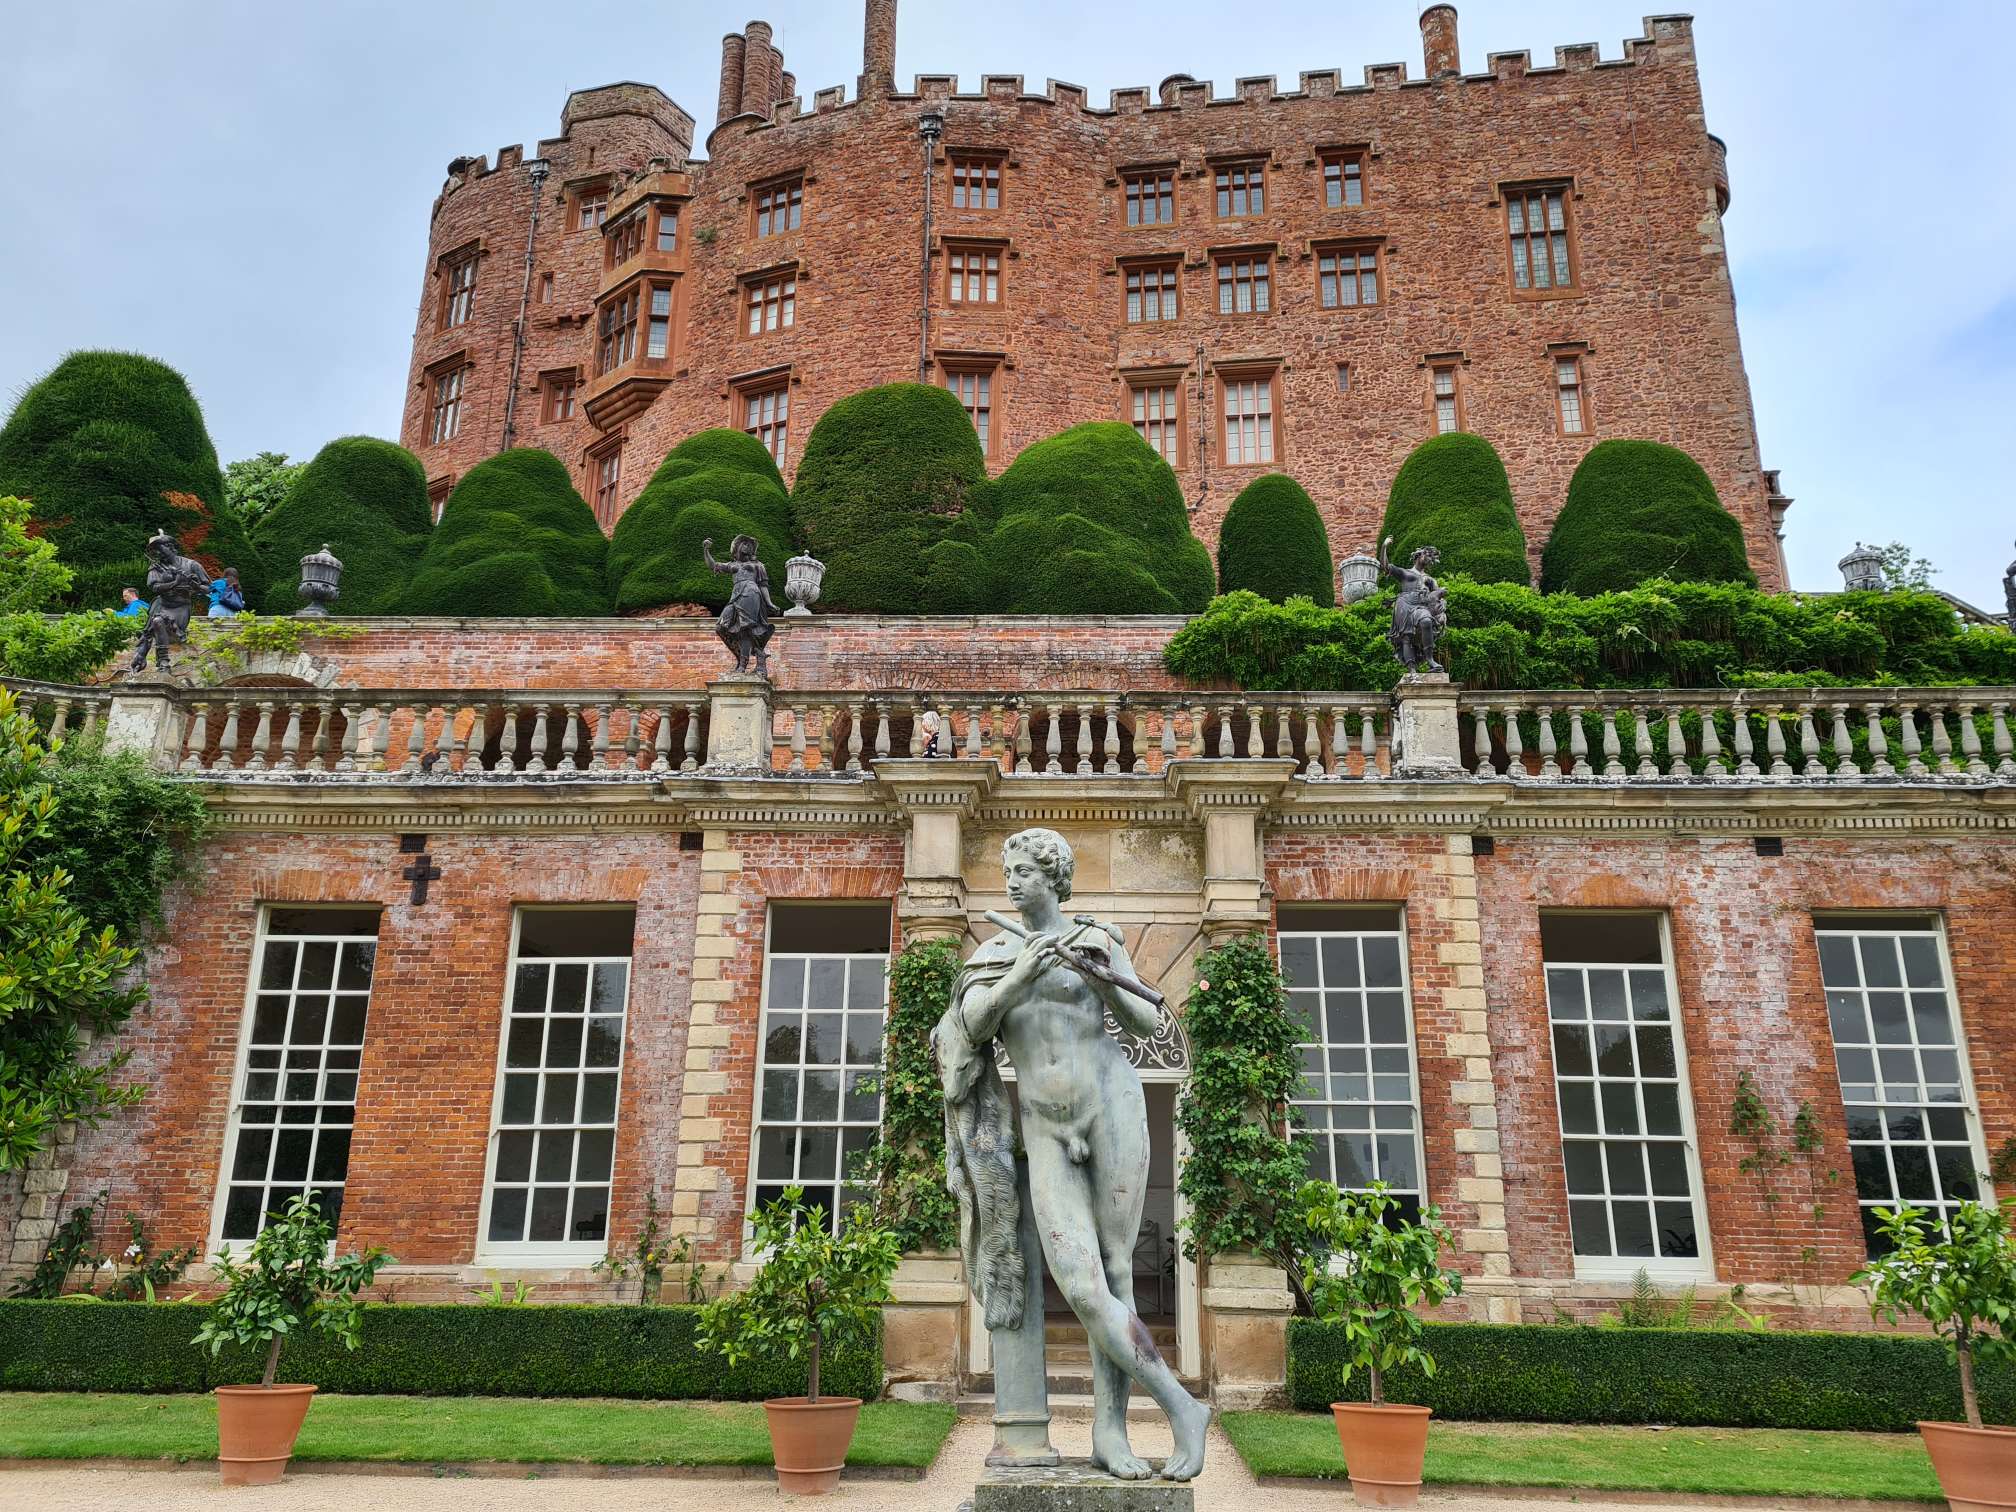 A picture taken from the gardens looking up at Powis Castle